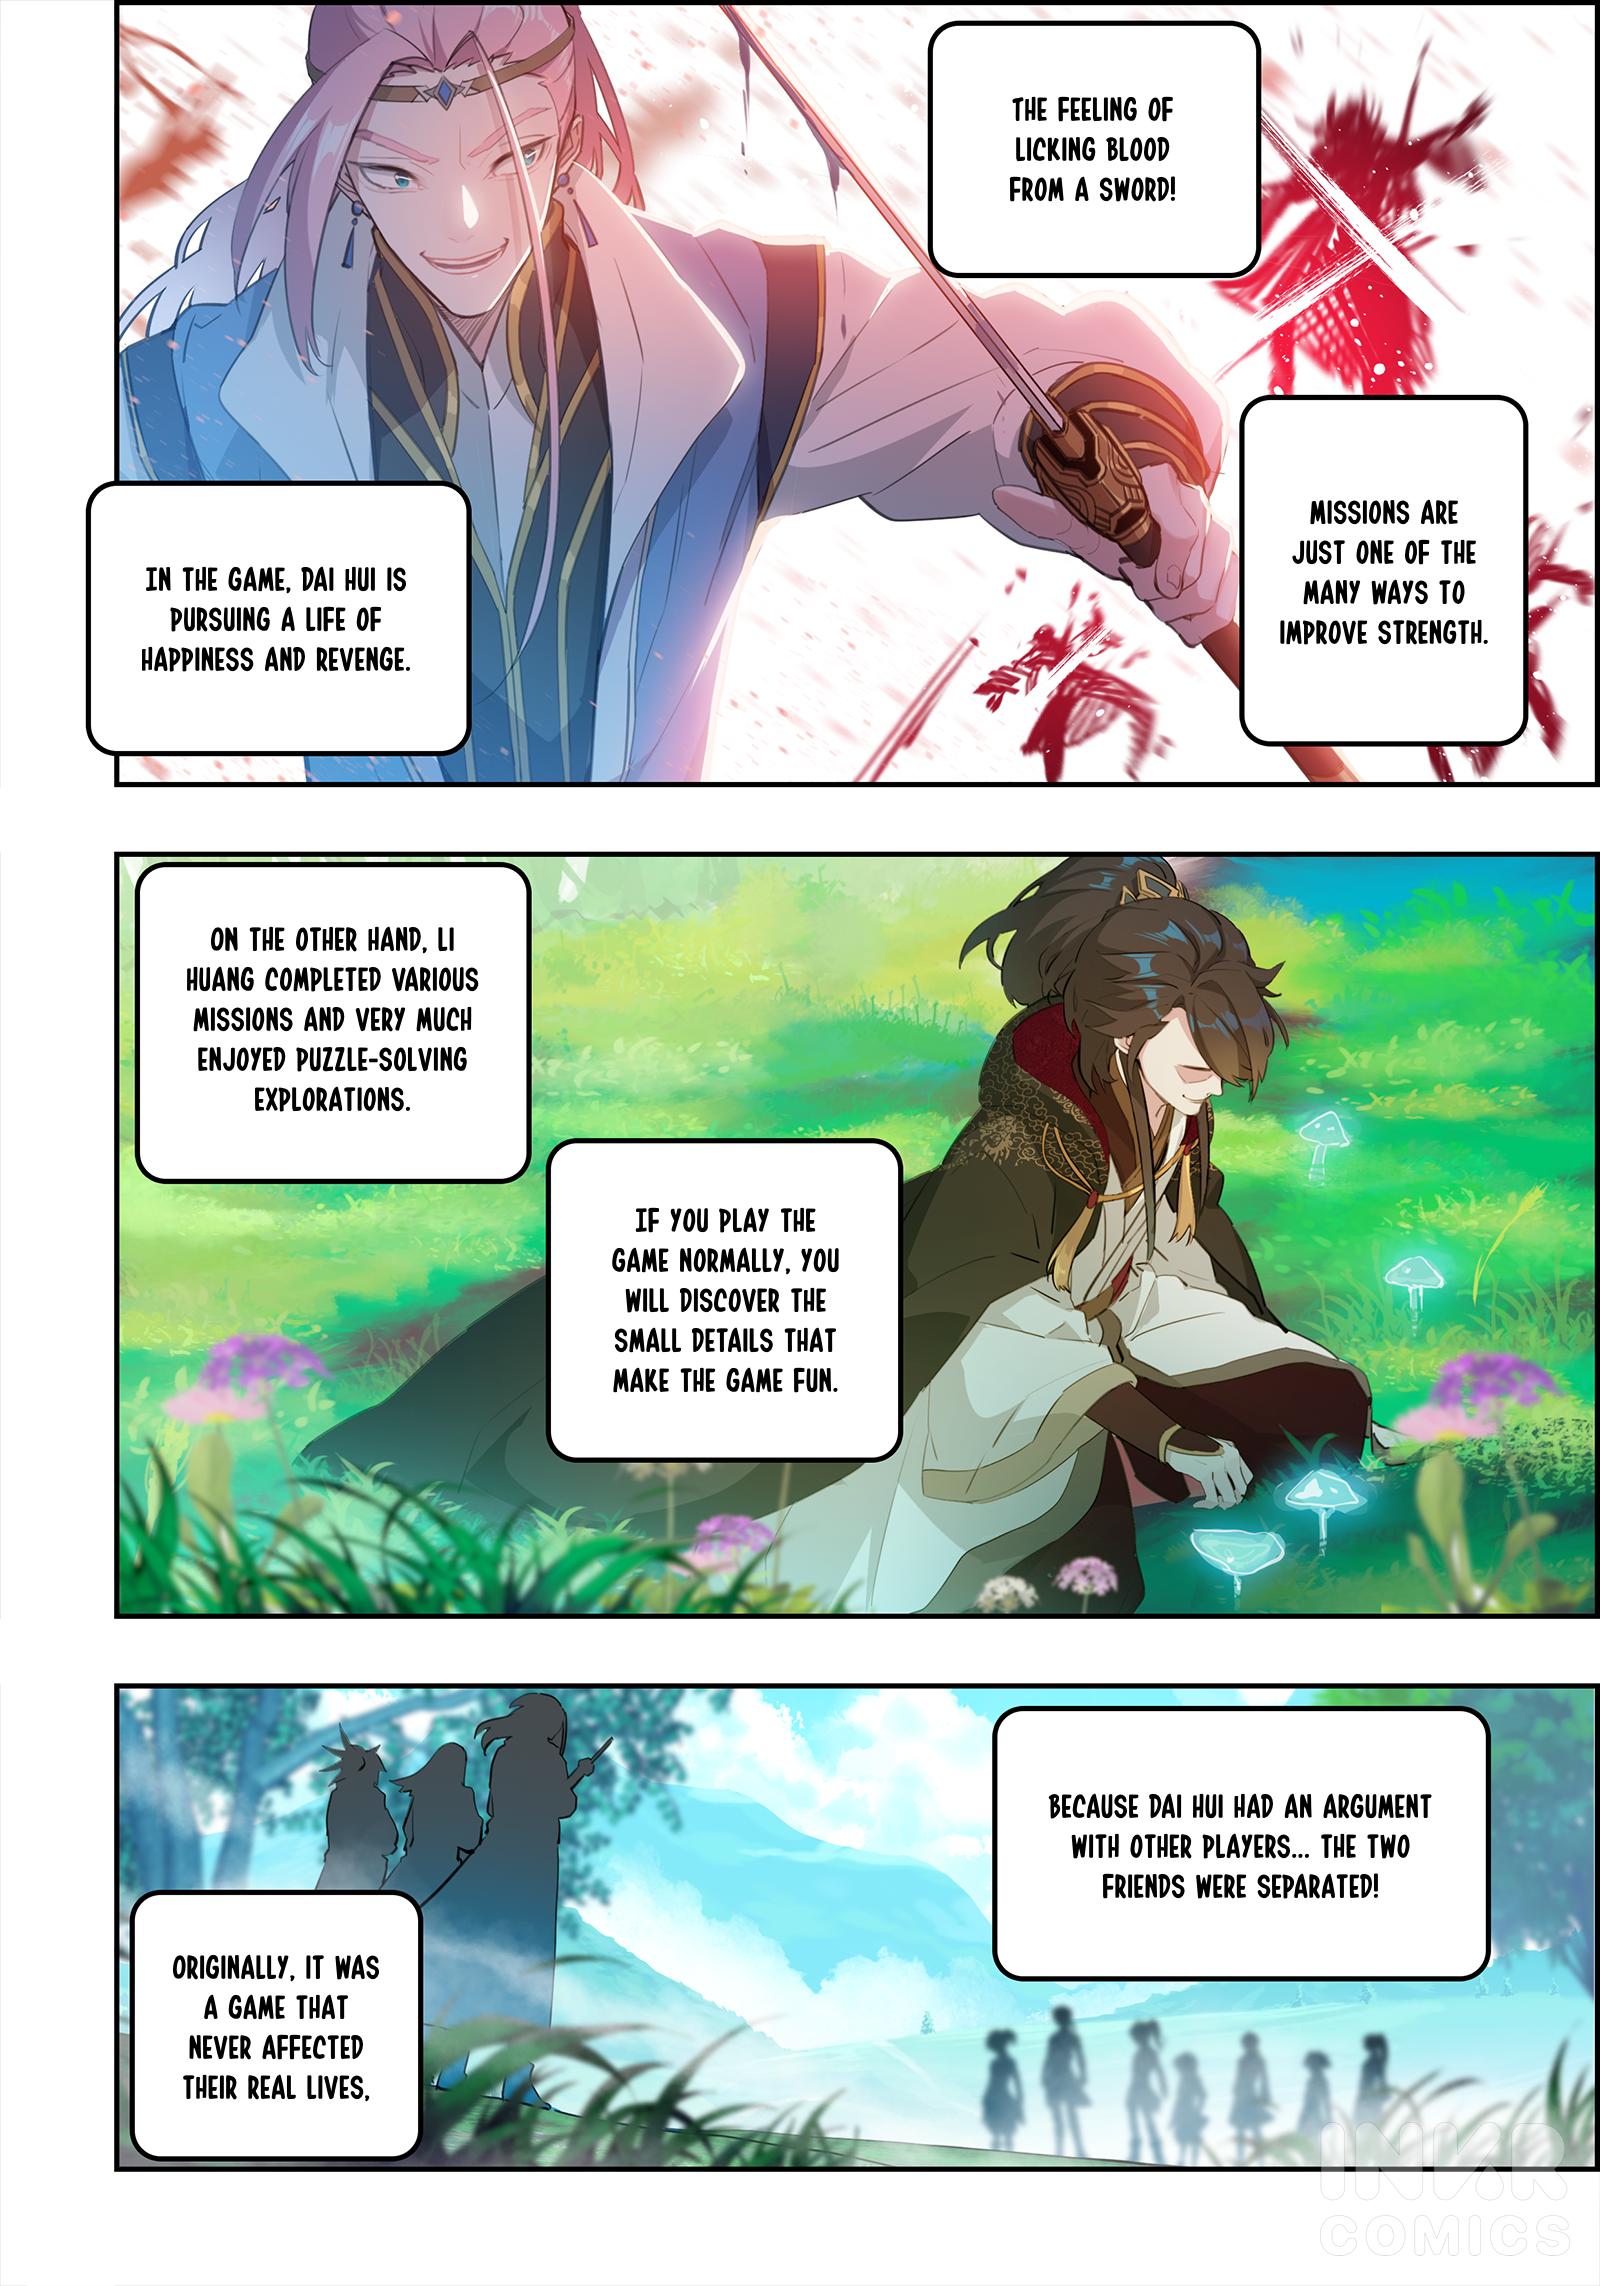 Jianghu: Missions Online - Page 2